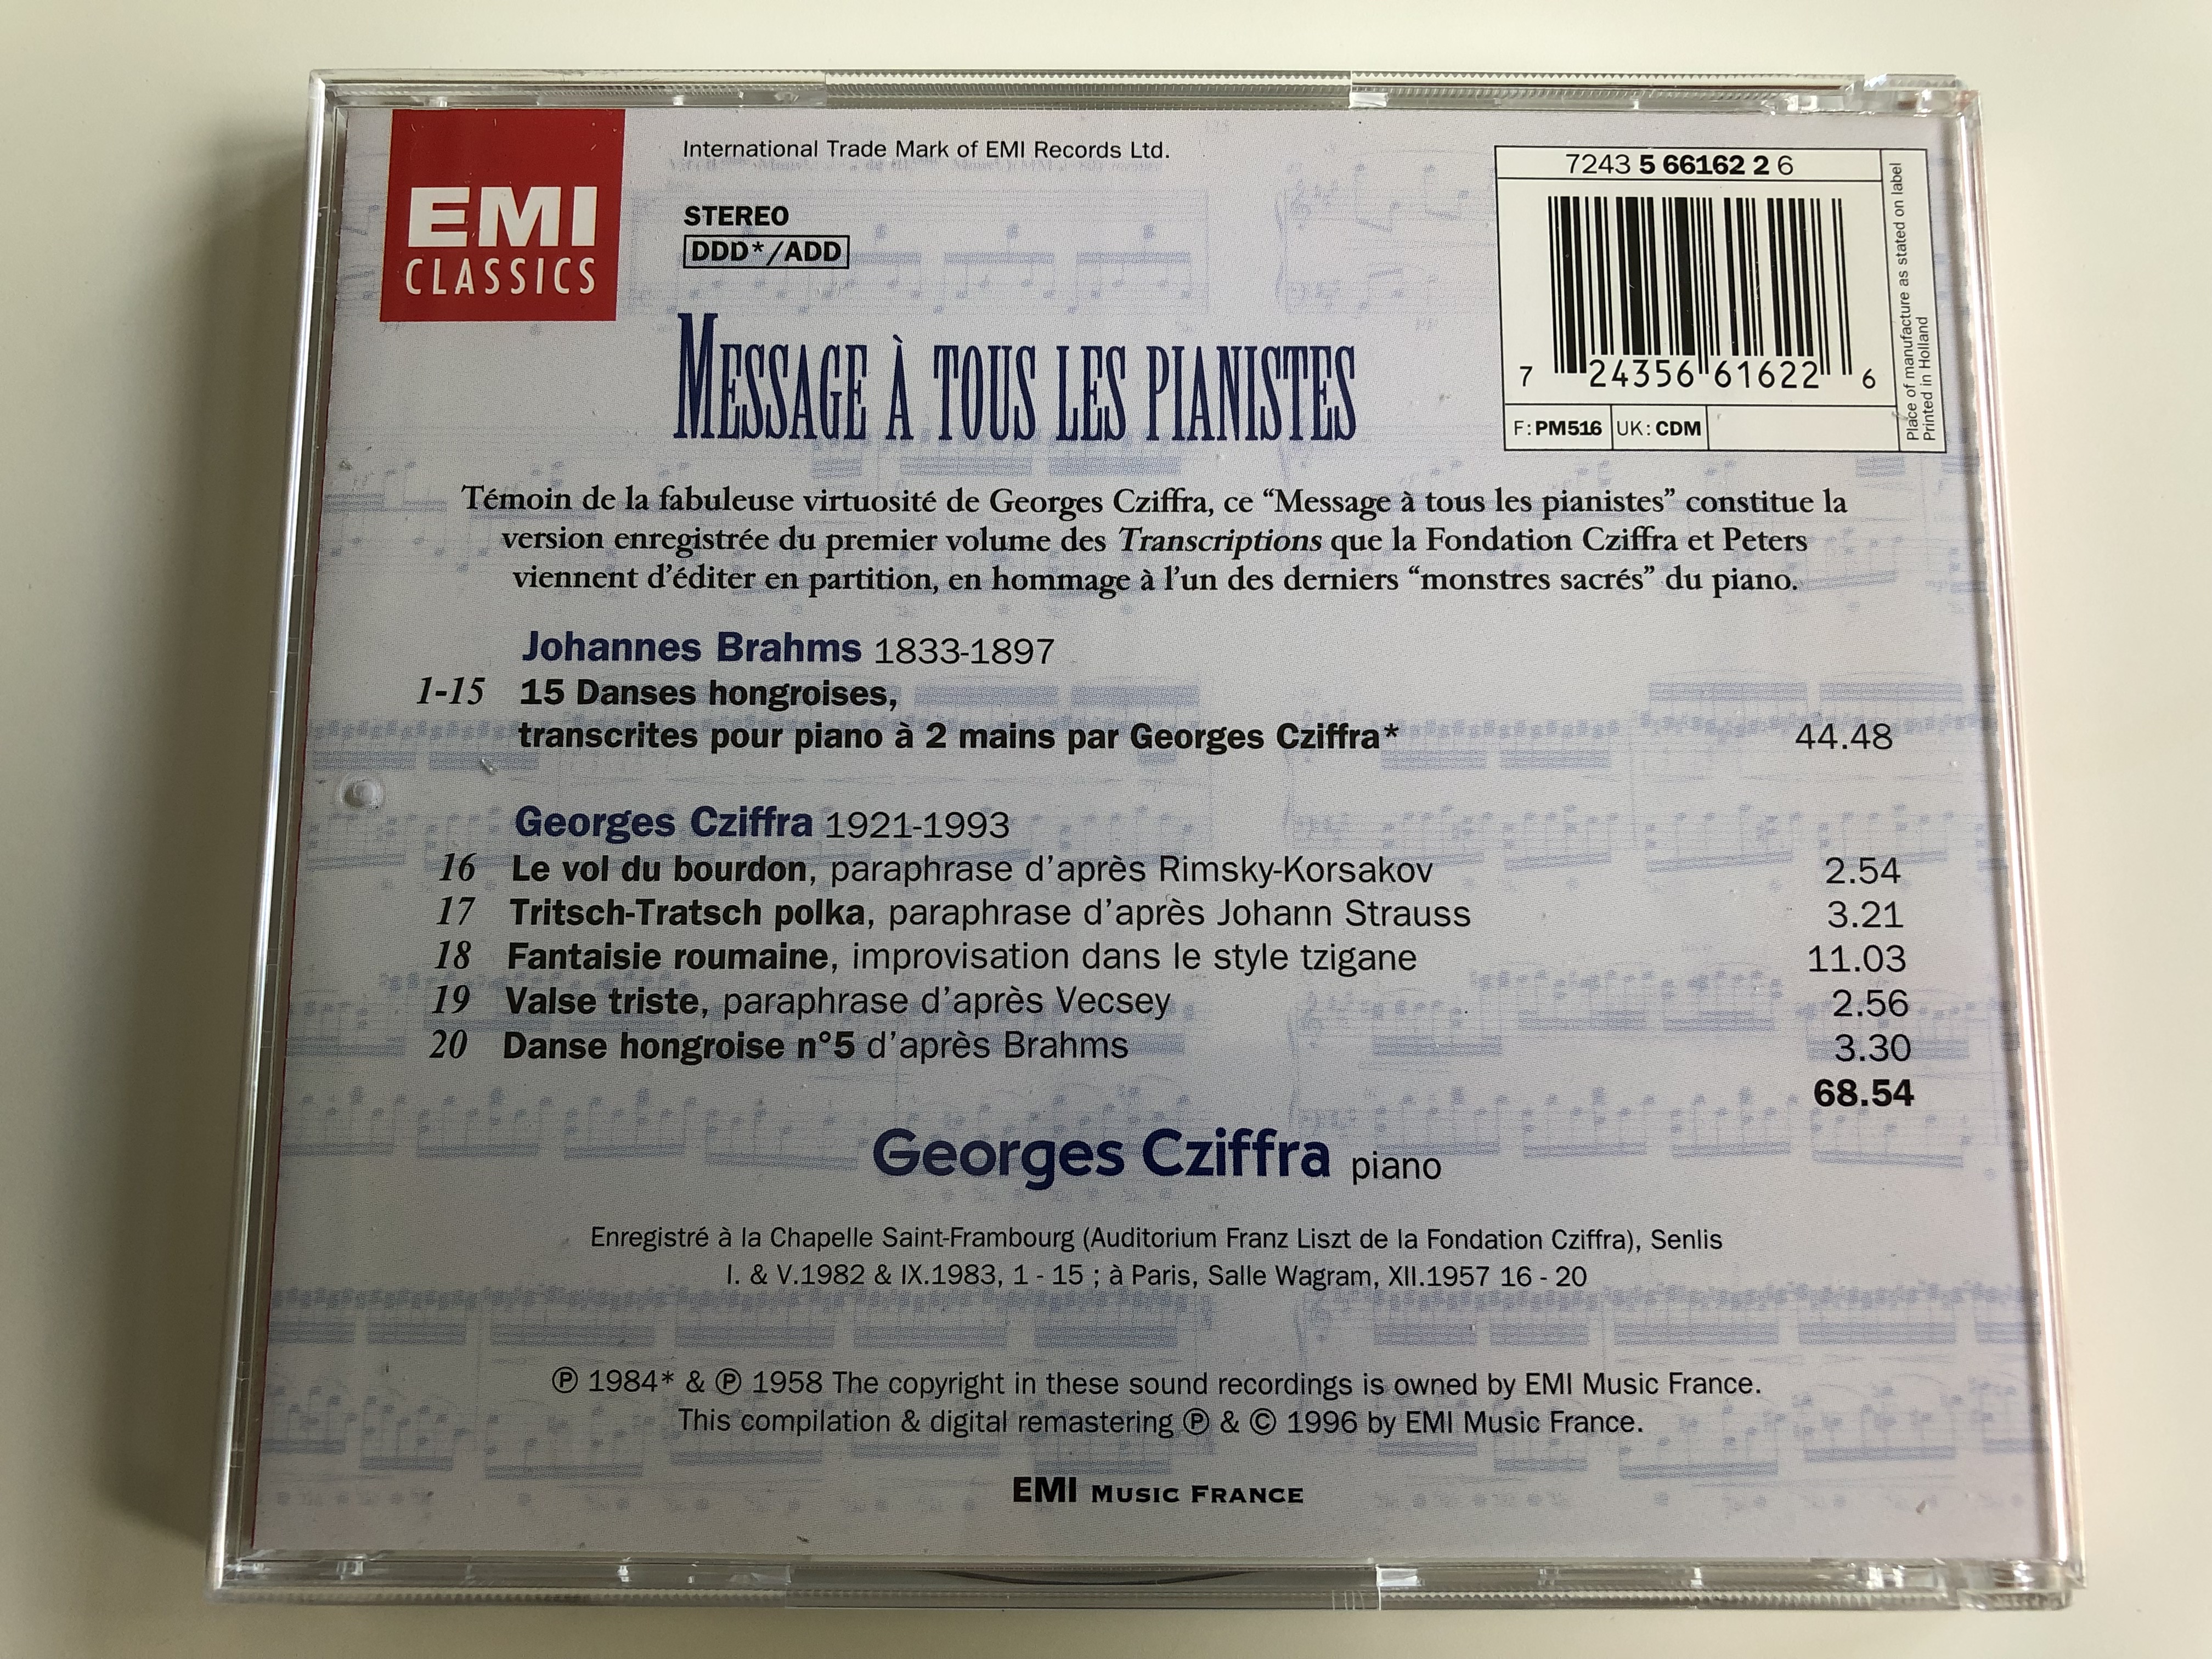 georges-cziffra-message-tous-les-pianistes-message-to-all-pianists-emi-classics-audio-cd-1996-7-.jpg